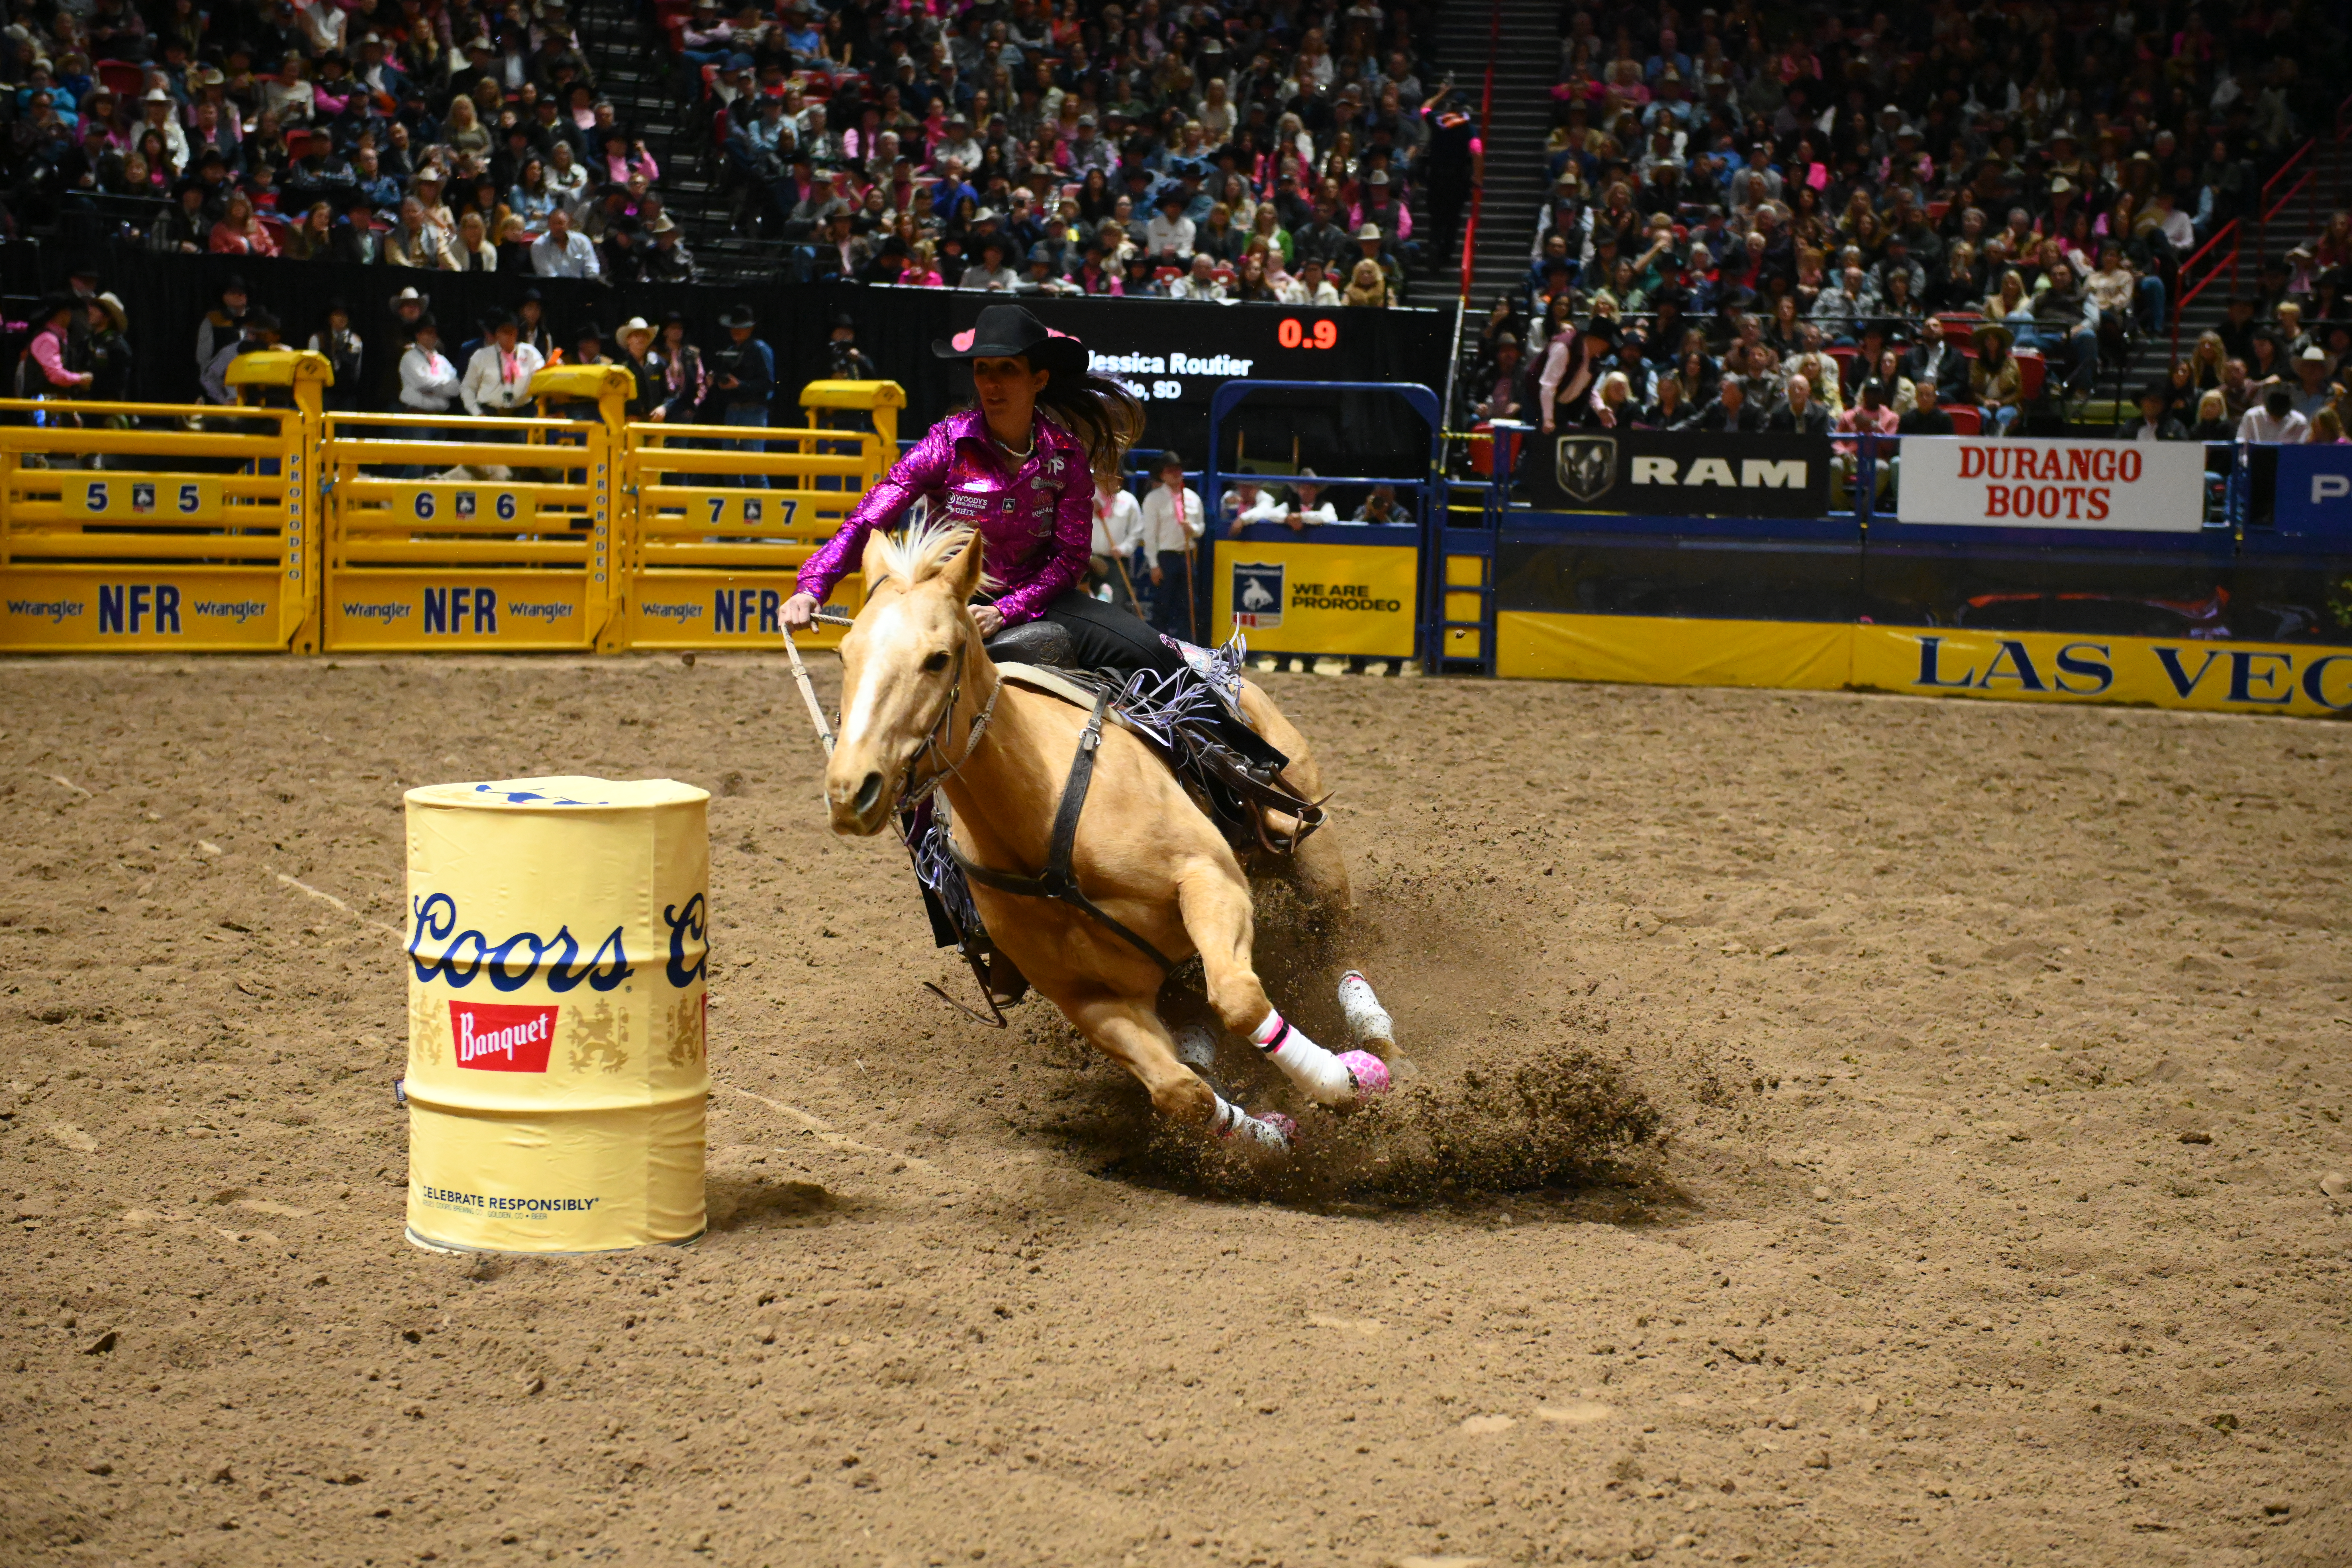 Jessica Routier and Missy NFR